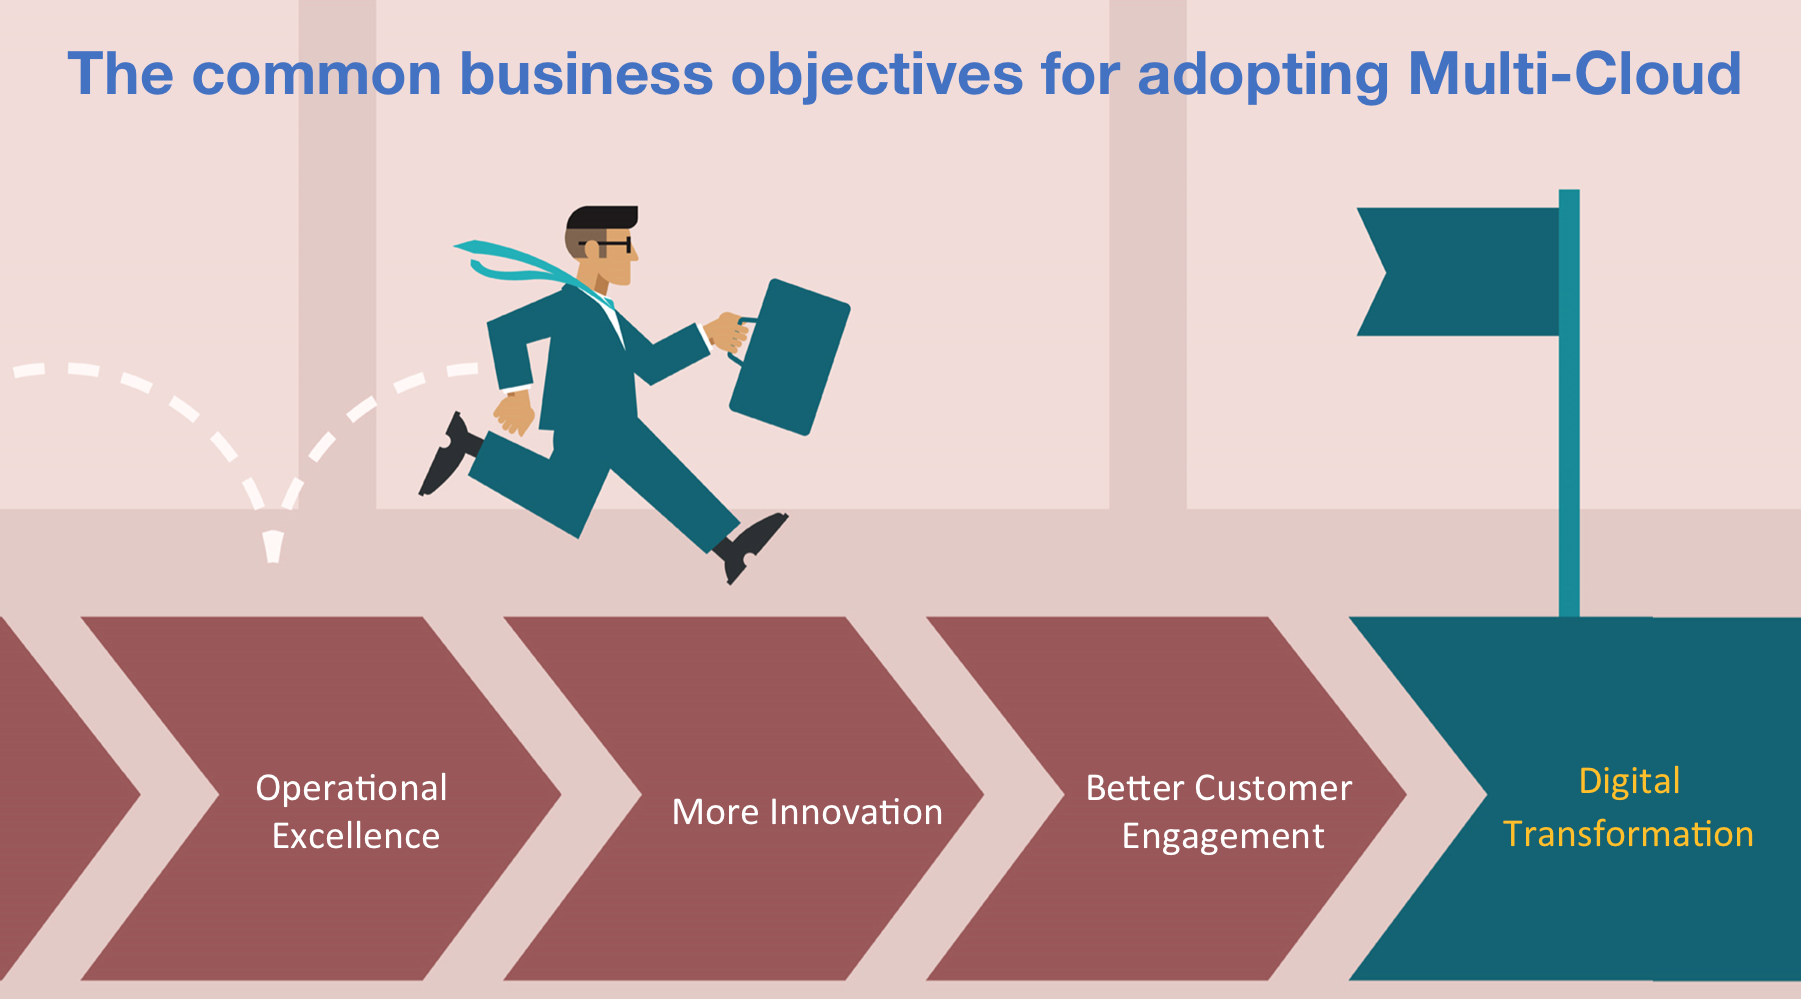 The common business objectives for adopting Multi-Cloud